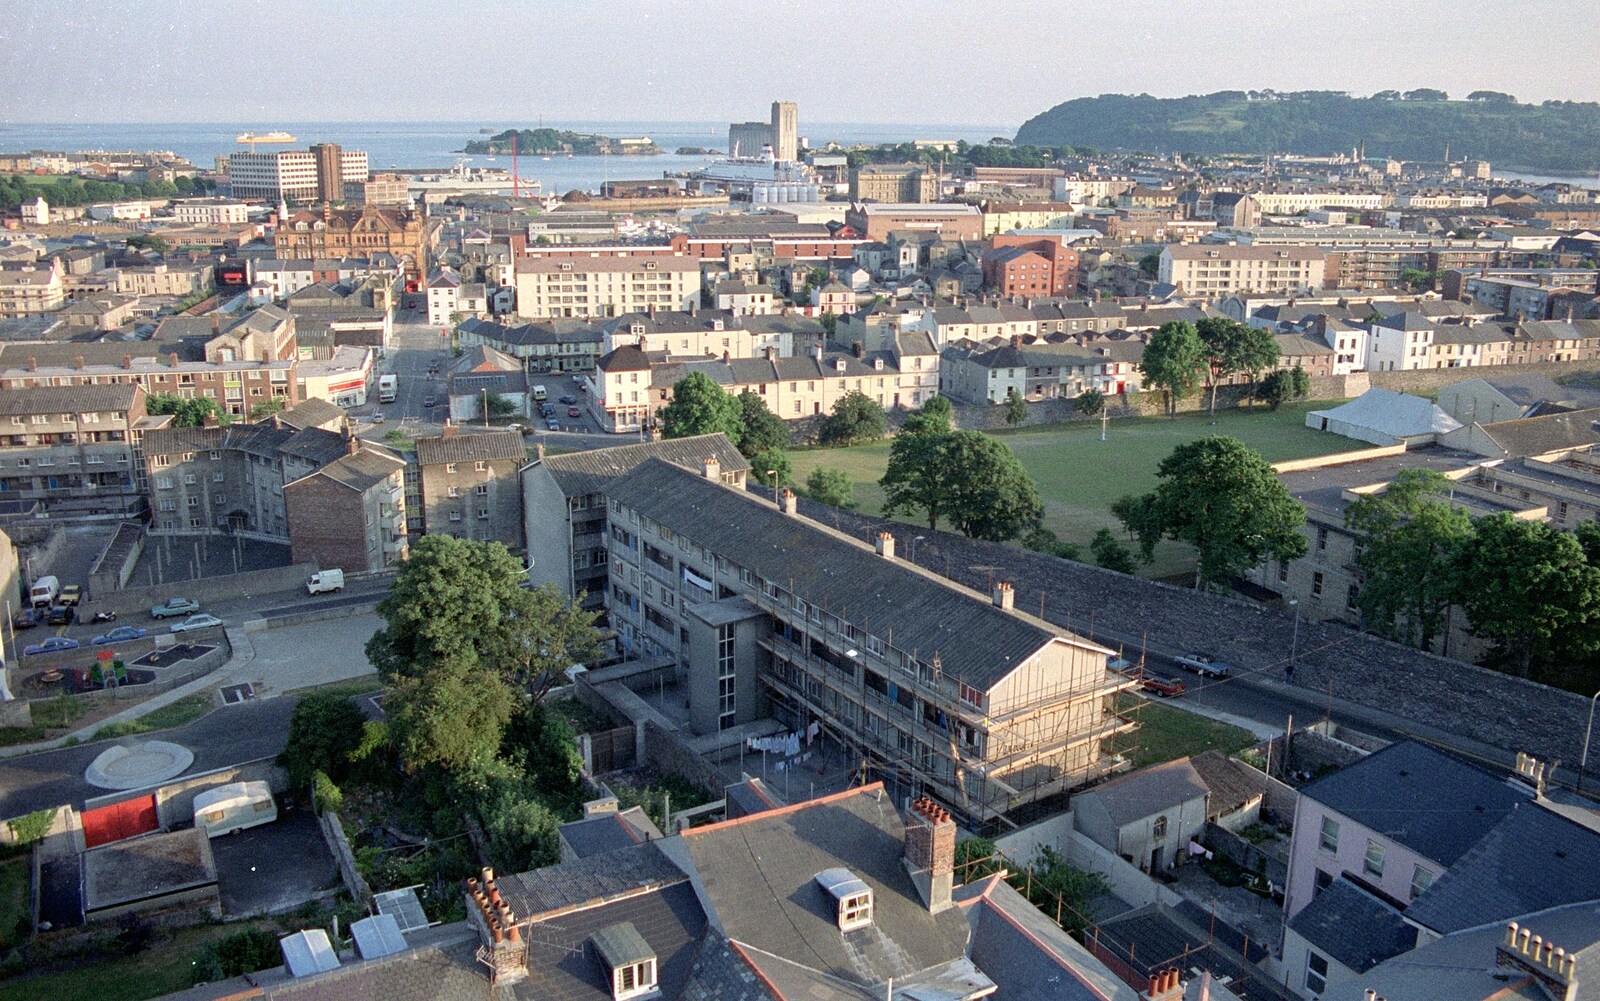 The view of Stonehouse again from Uni: Views From St. Peter's Church Tower, Wyndham Square, Plymouth, Devon - 15th June 1989